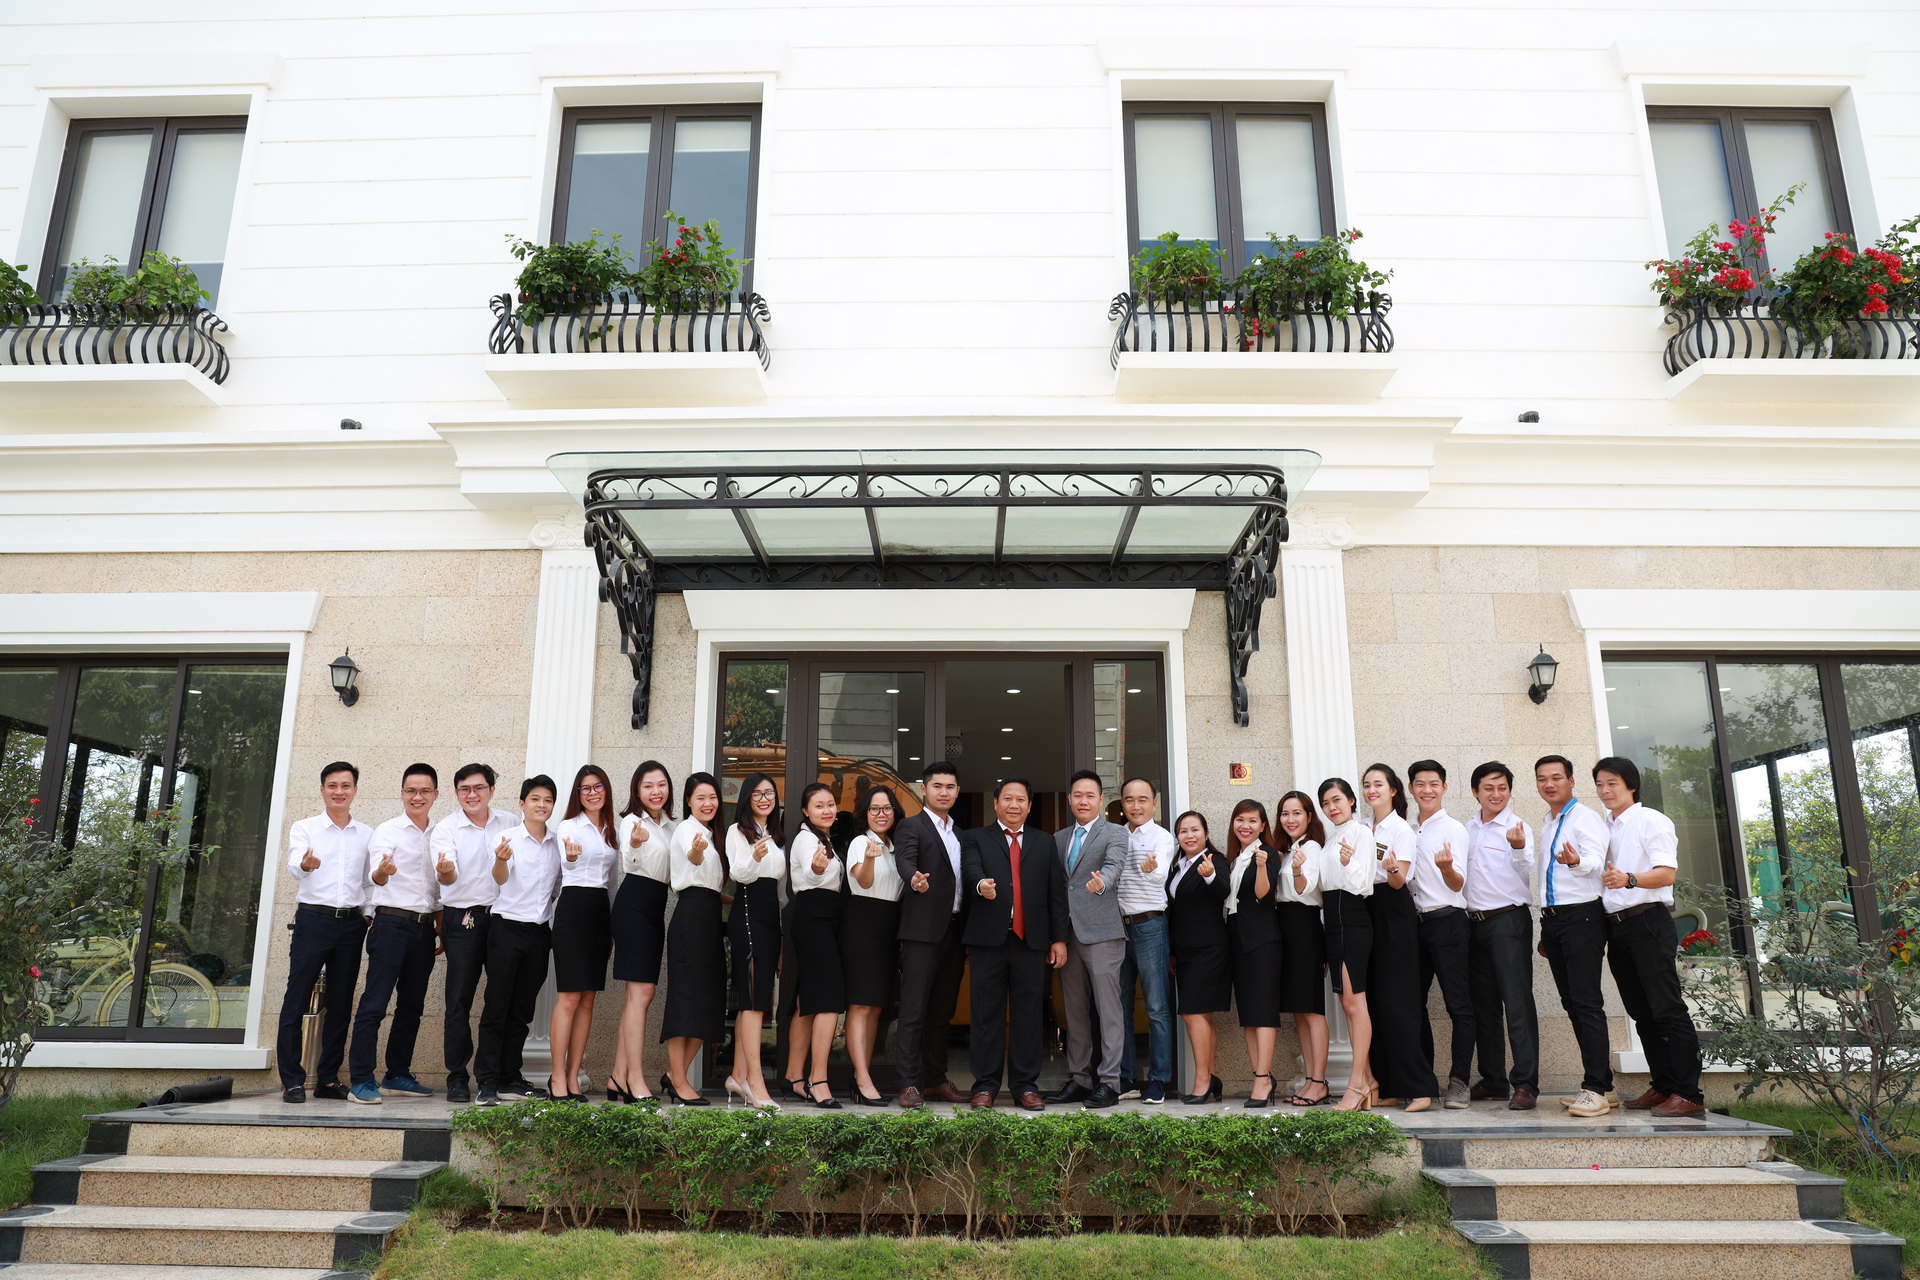 INDOCHINE NHA TRANG has completed 3 years of operation. (2017 - 2020)